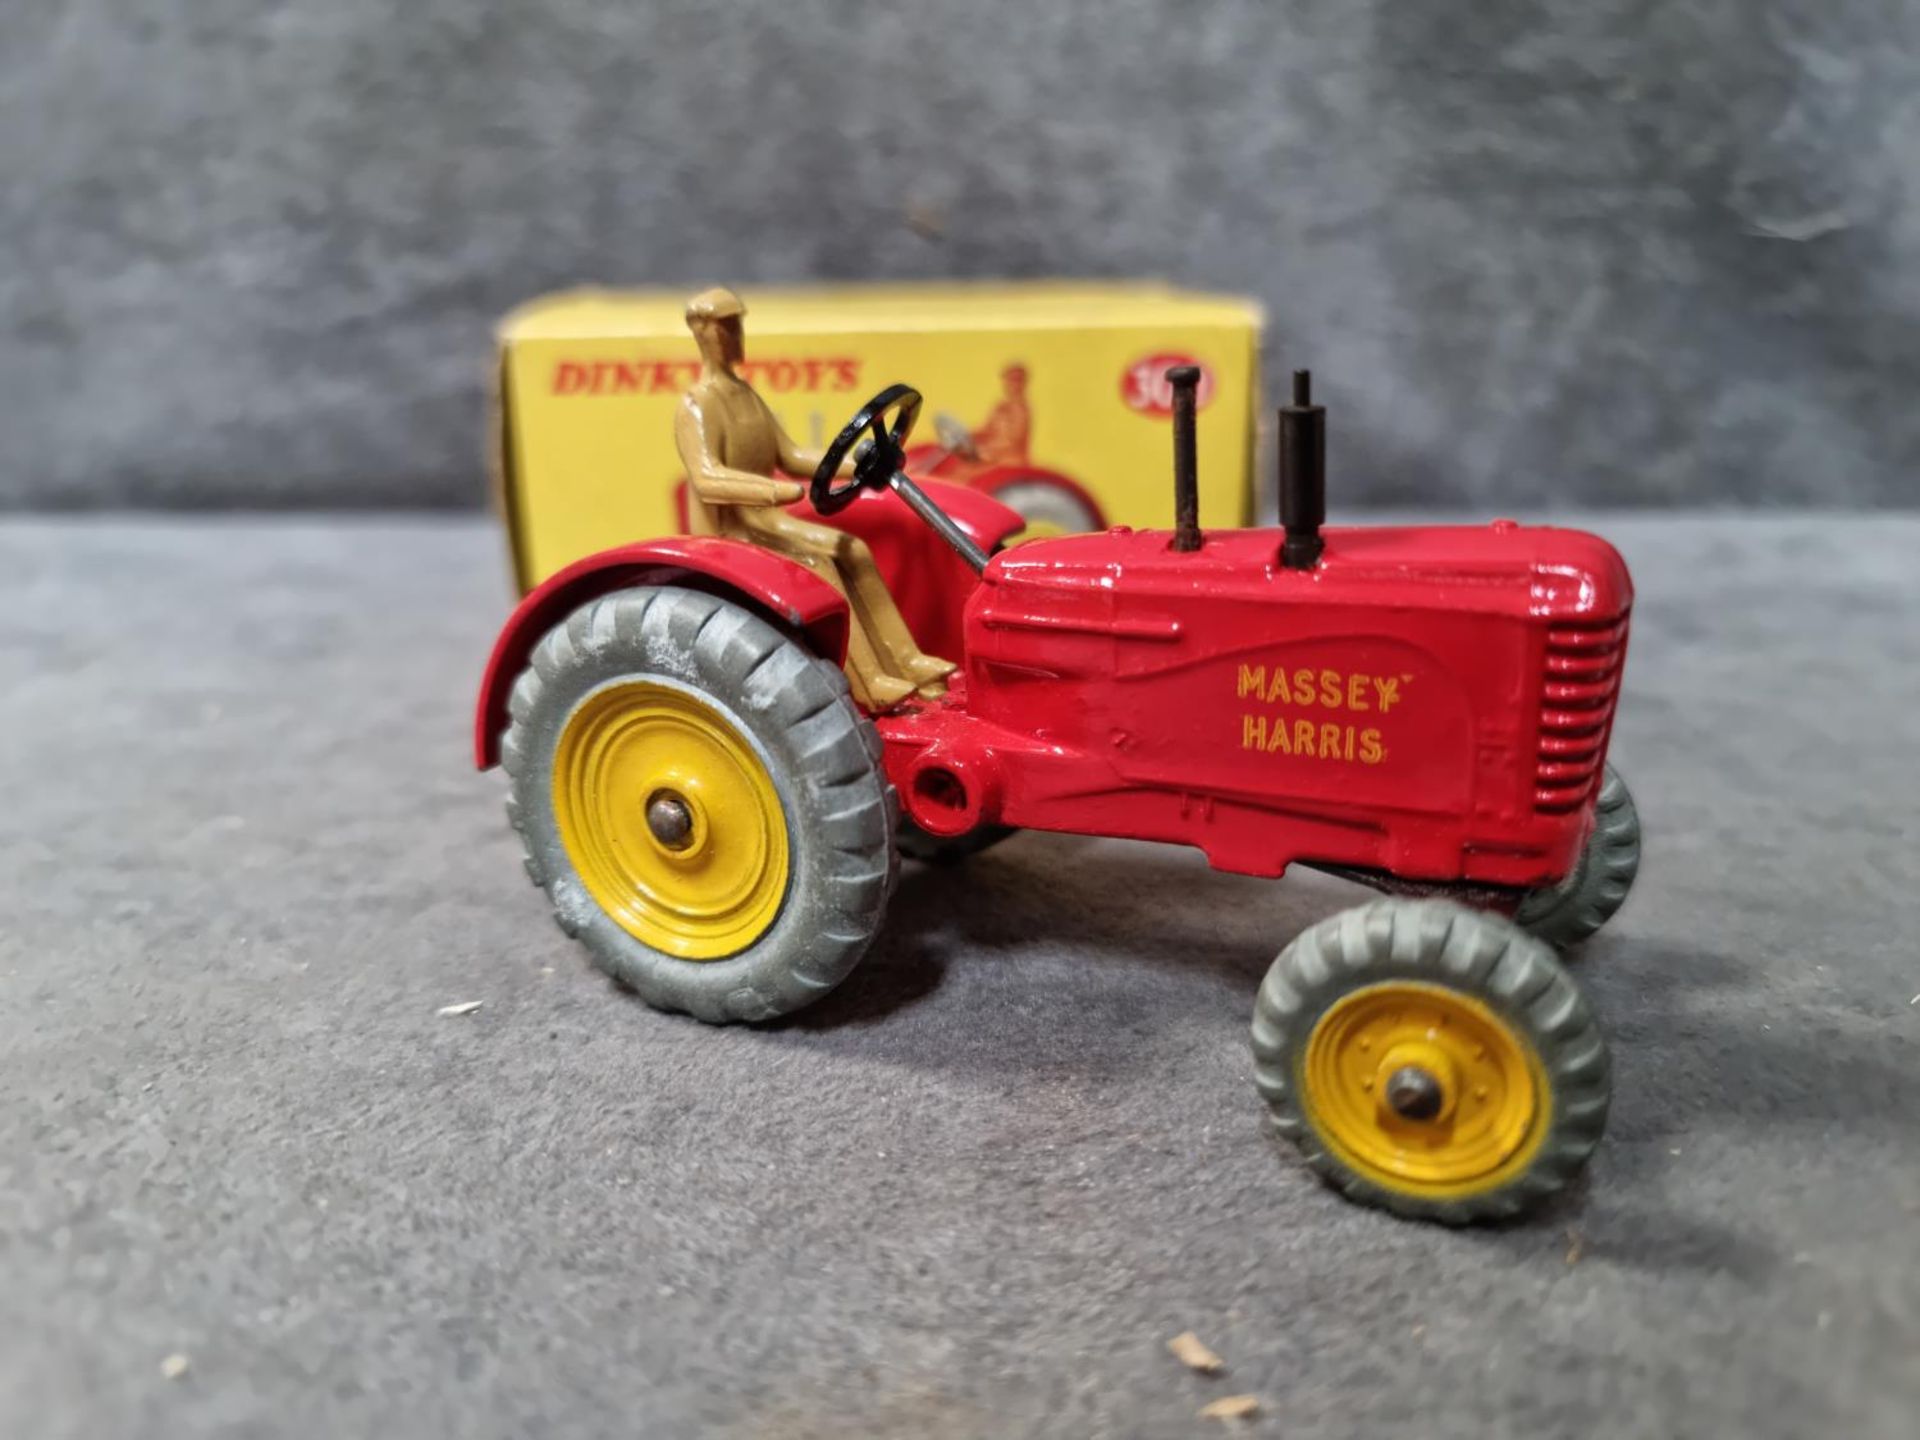 Dinky #300 Massey Harris Tractor Mint In Near Mint Slightly Soiled Box 1966-1971 - Image 2 of 2